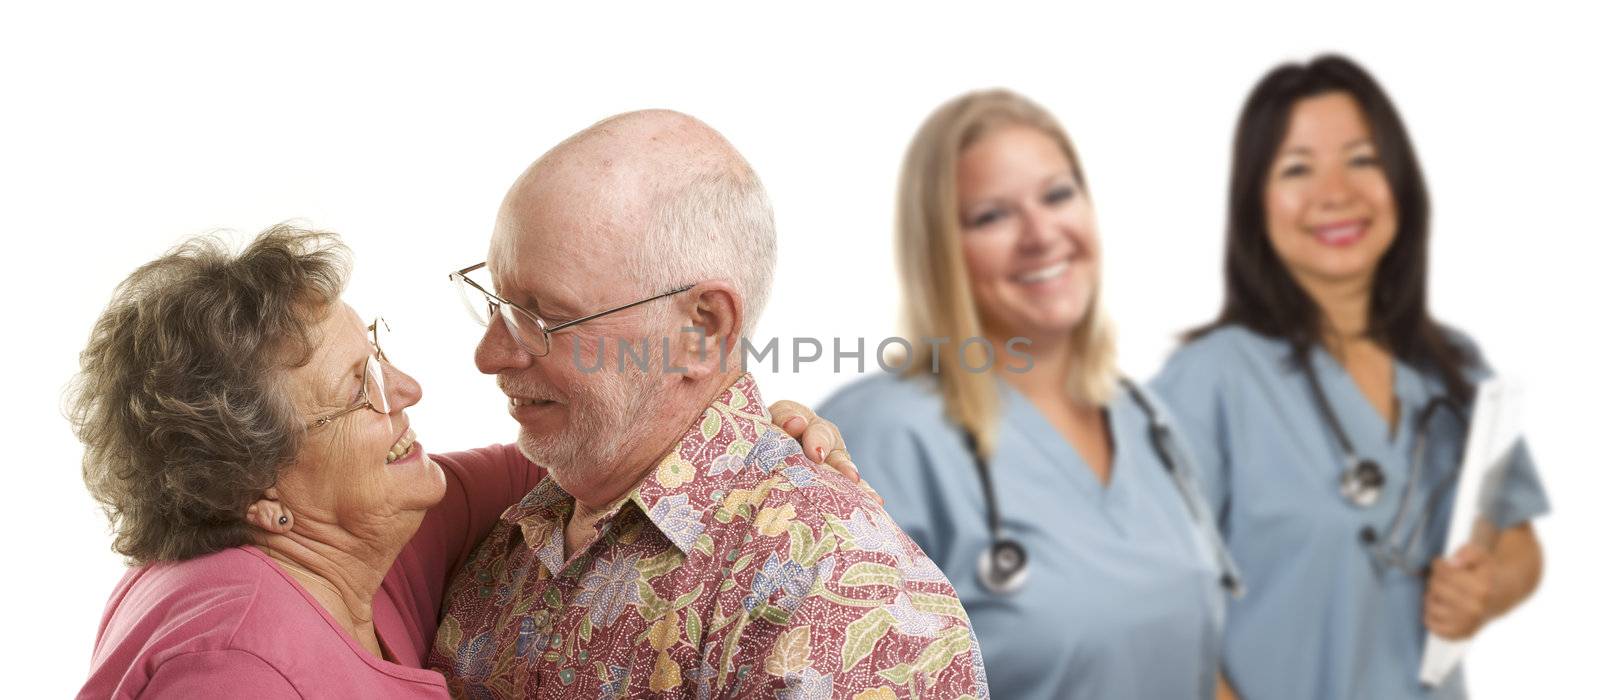 Happy Loving Senior Couple with Smiling Medical Doctors or Nurses Behind Isolated on a White Background.